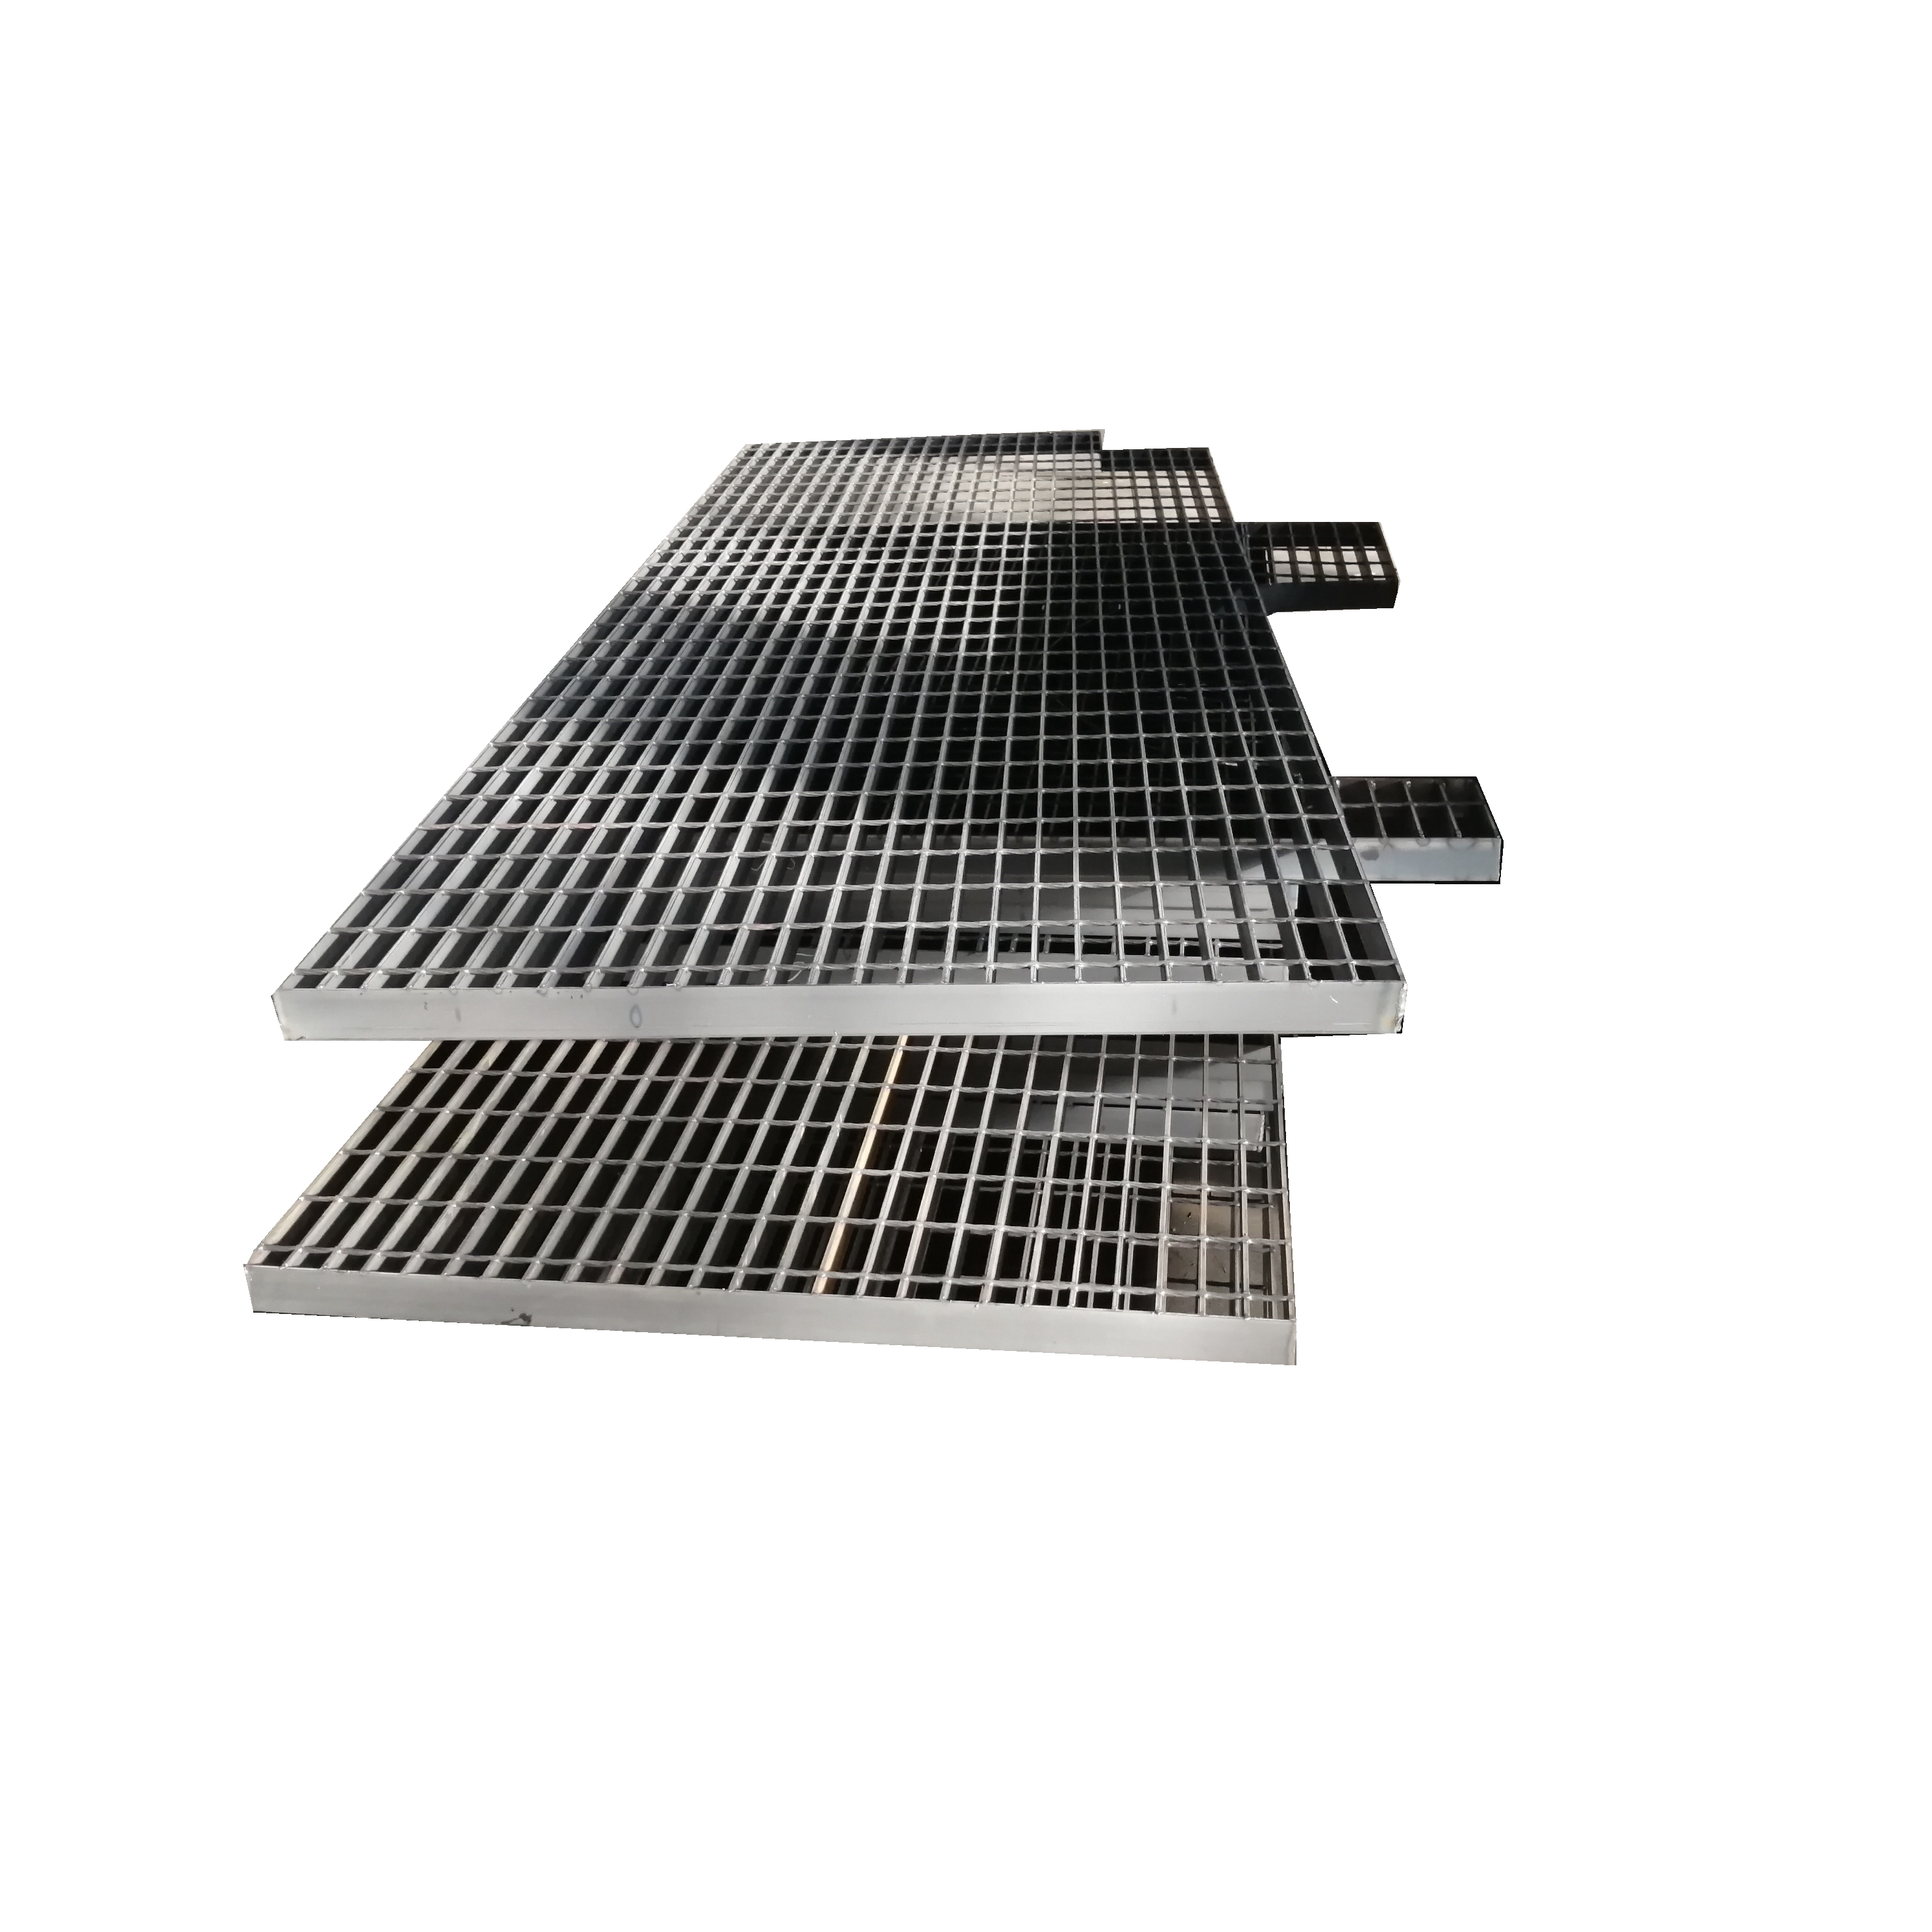 I 32 Stainless Galvanized Mild Standard Prices Weight Size Steel Grating Featured Image